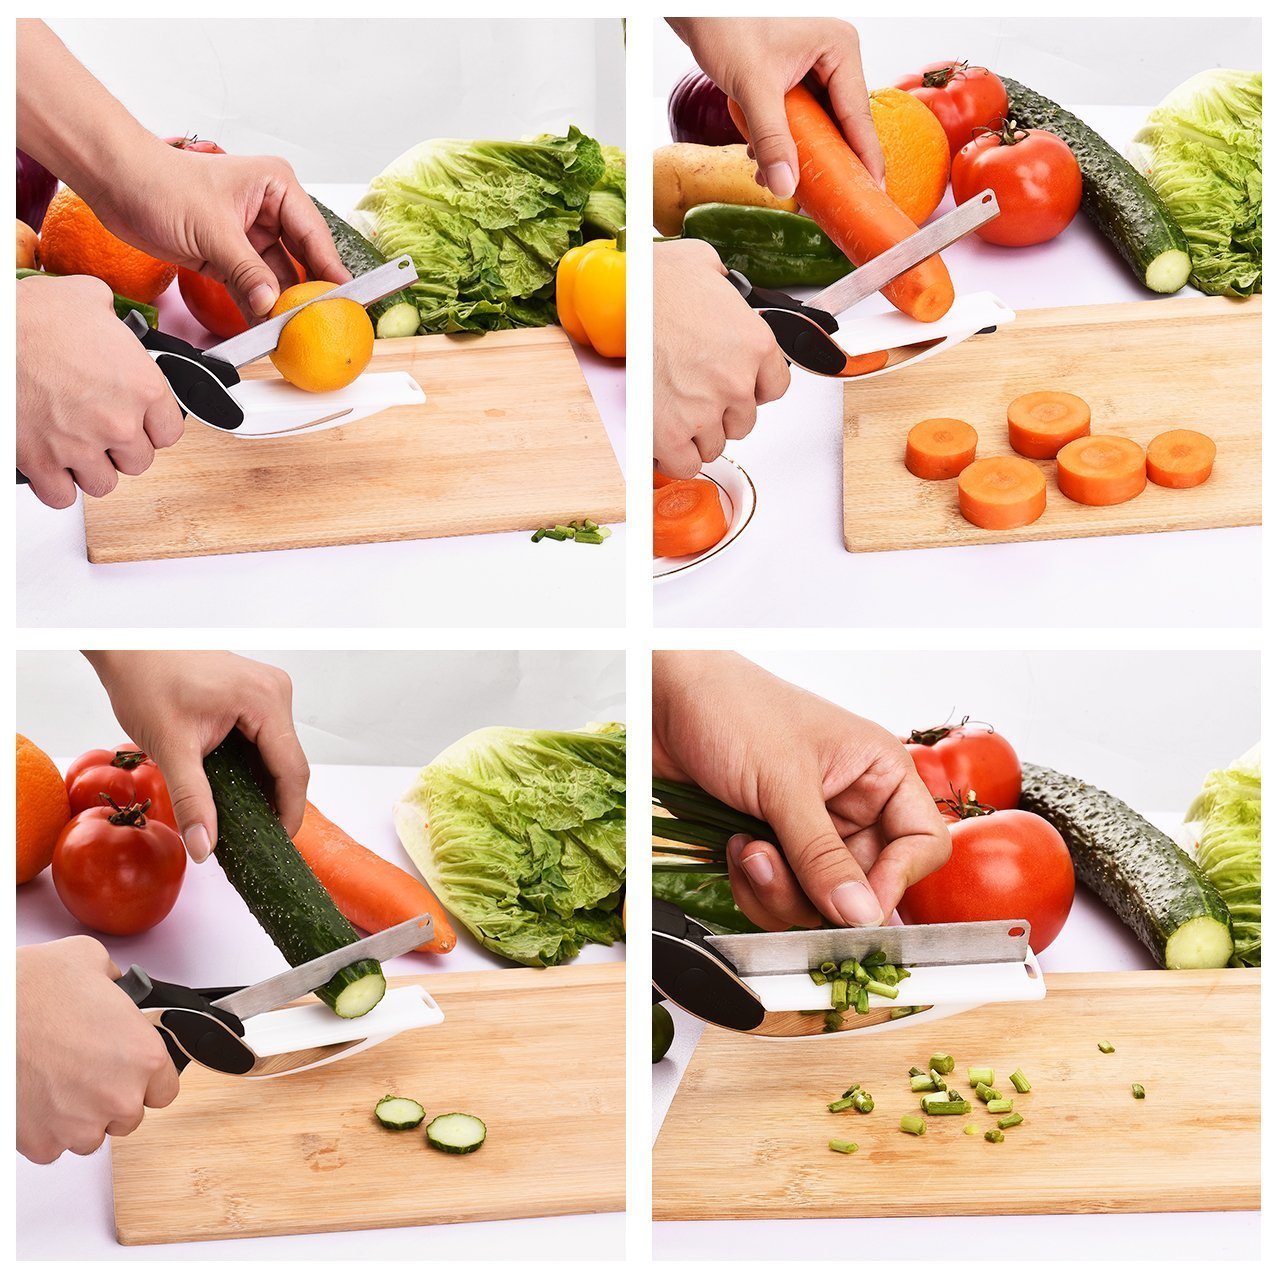 Colorful--2-In1-Vegetable-Food-Scissor-And-Cutting-Board-Stainless-Steel-Cutter-Knife-1104164-1